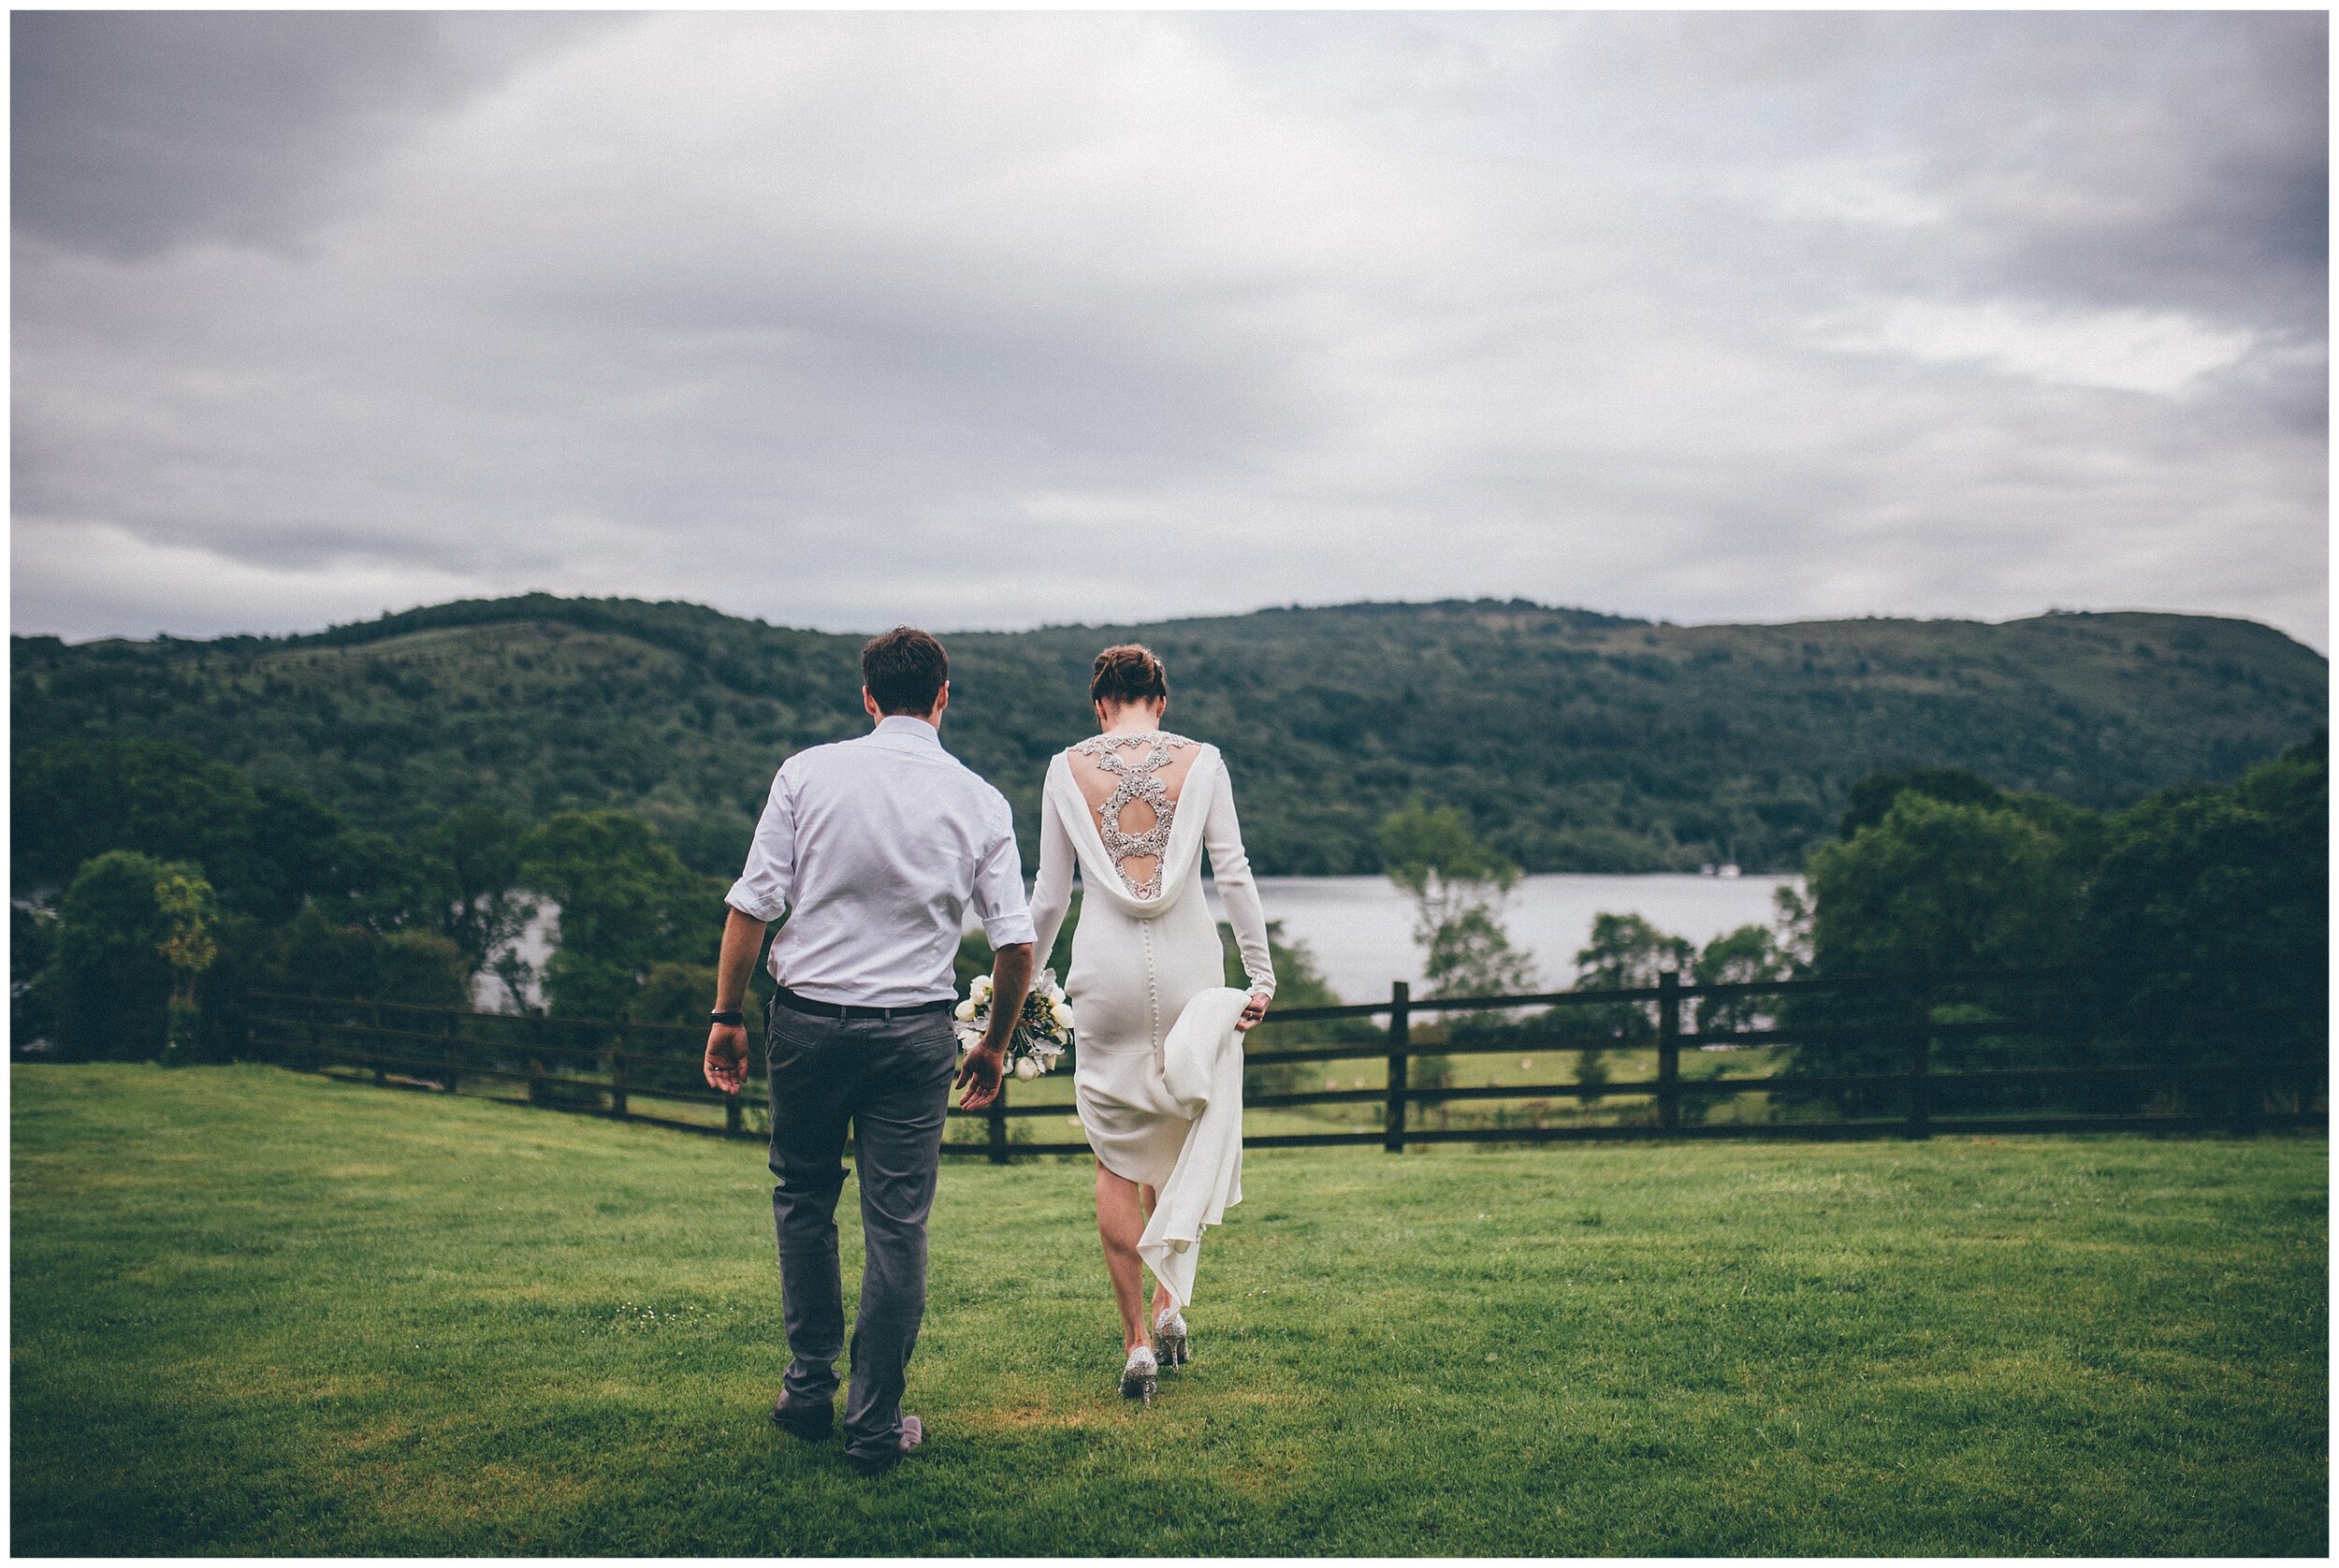 Helen Jane Smiddy wedding photography at Lake District wedding venue.